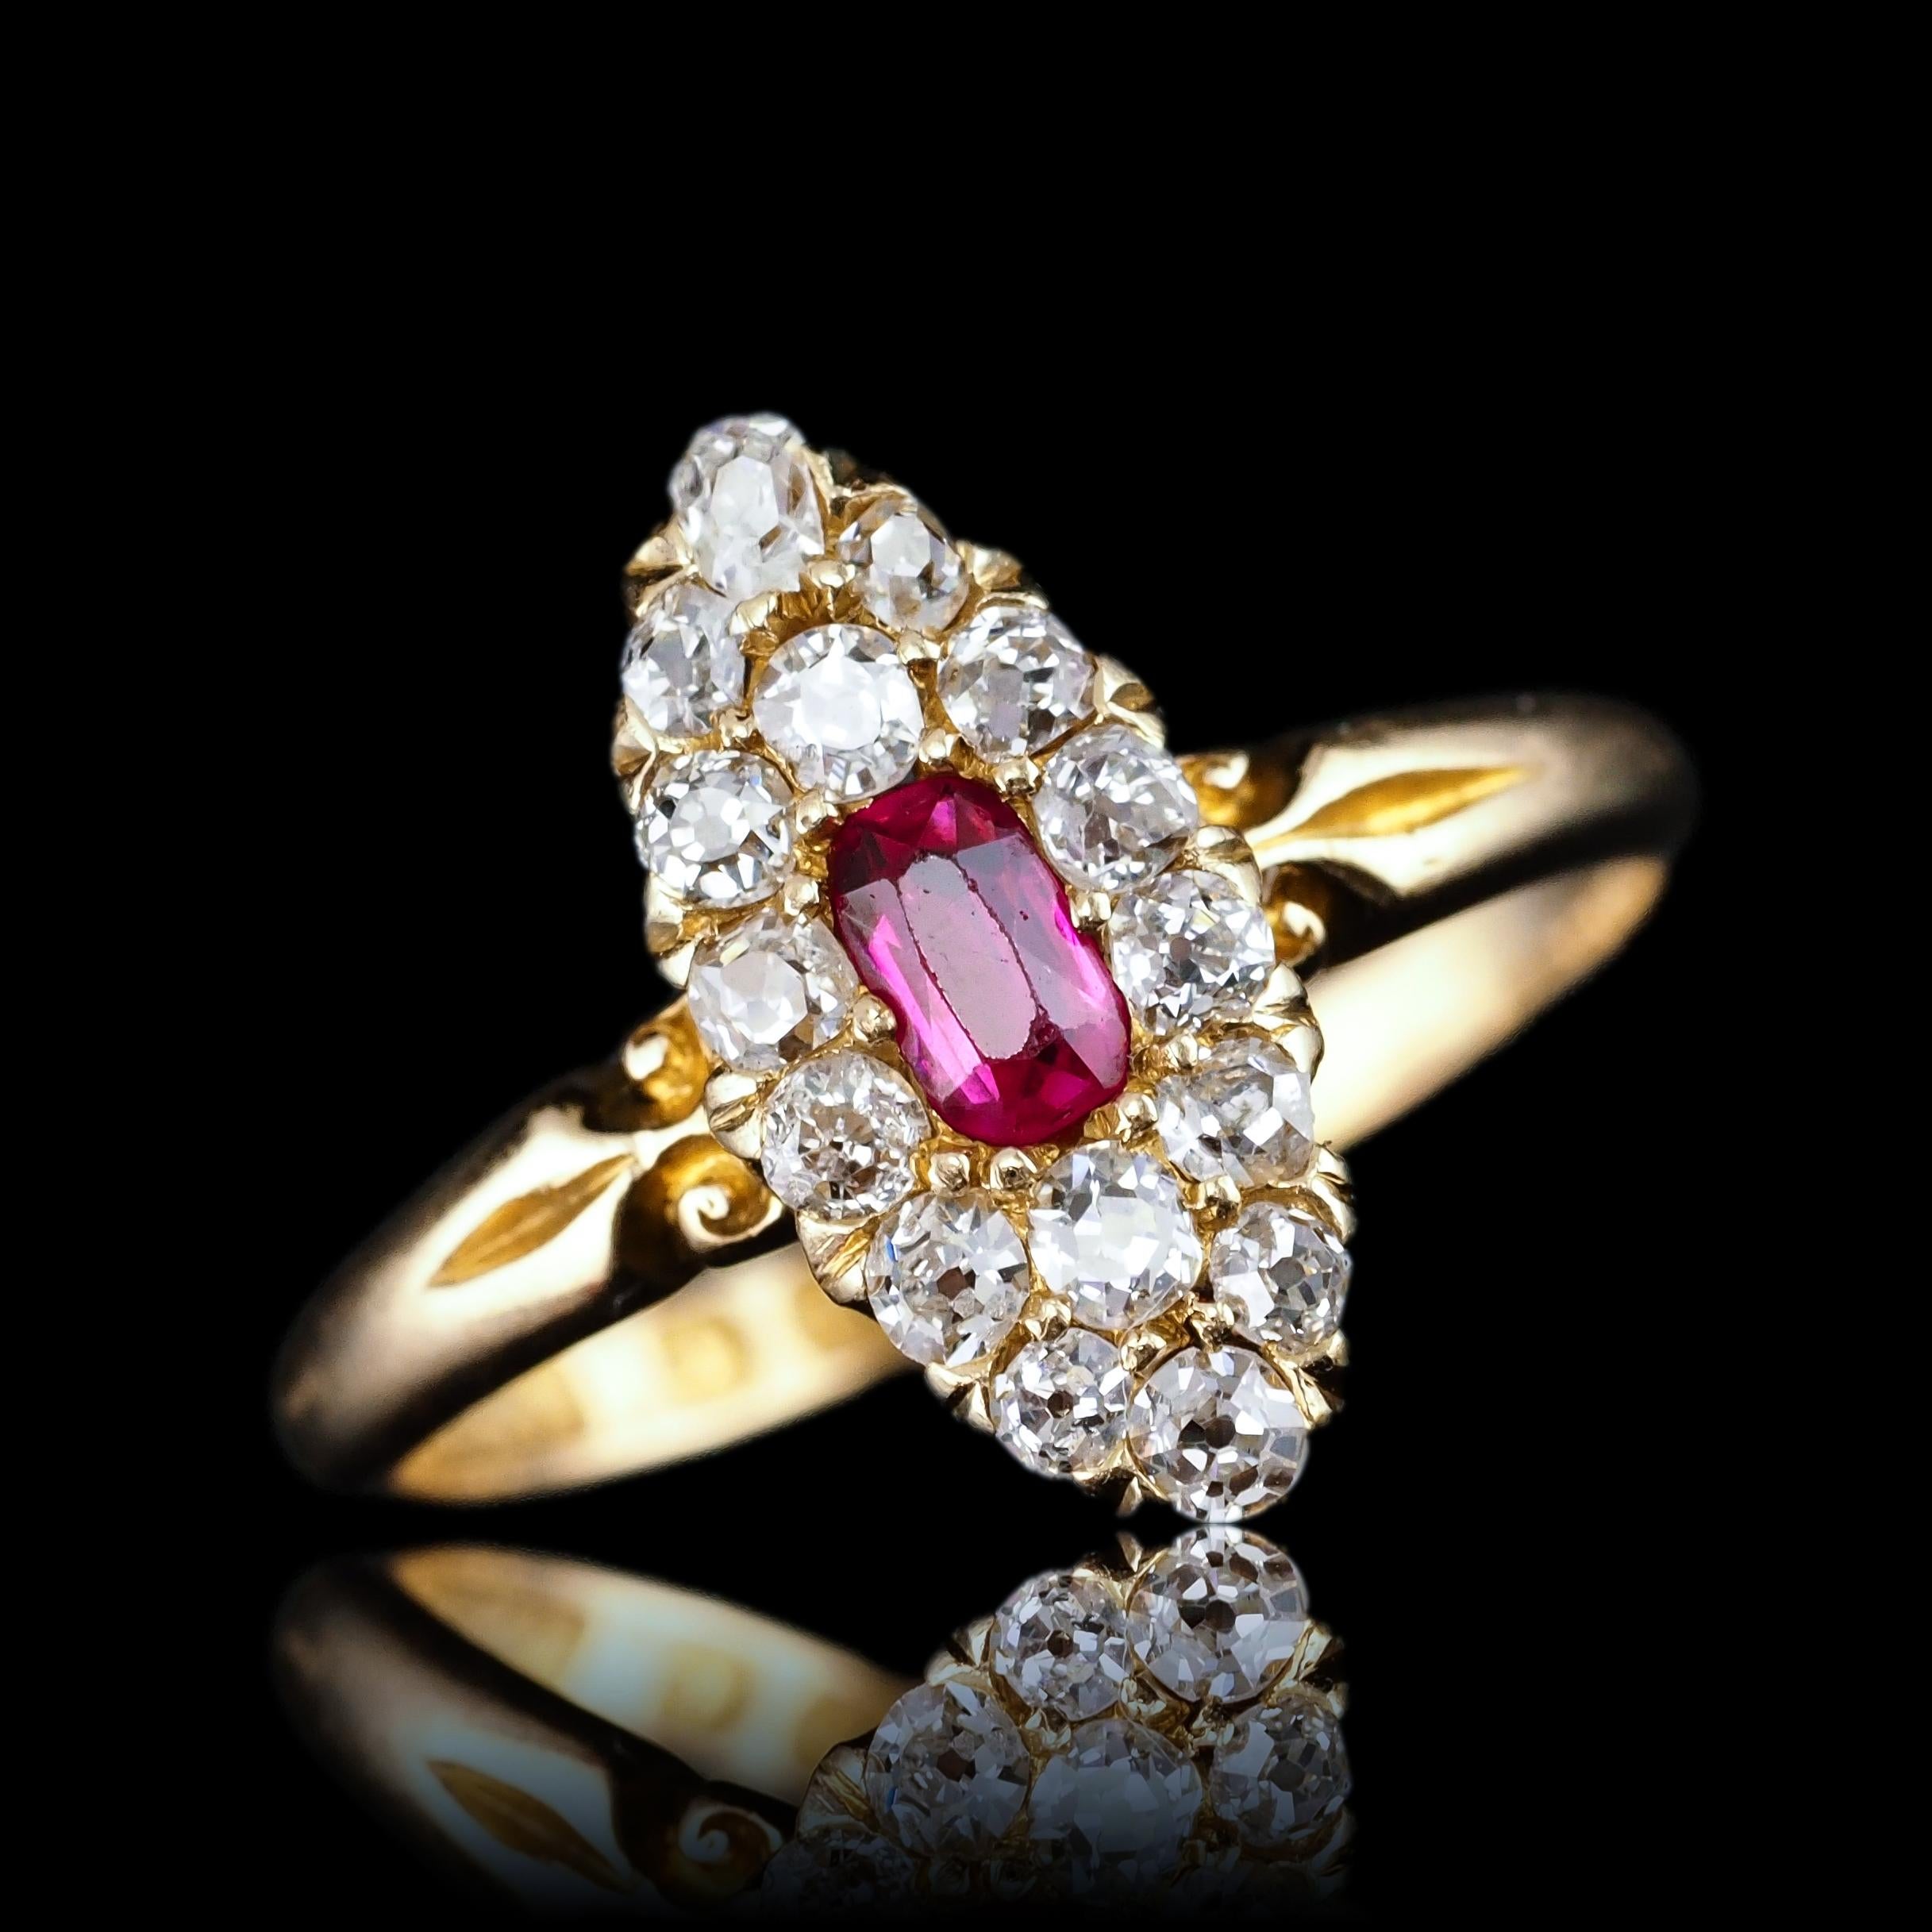 We are delighted to offer this superb Victorian 18ct gold ruby and diamond navette ring made in Birmingham in 1886 by G.Bro.
 
Distinctly Victorian and distinguished from contemporary pieces, this gorgeous piece presents one central ruby encompassed